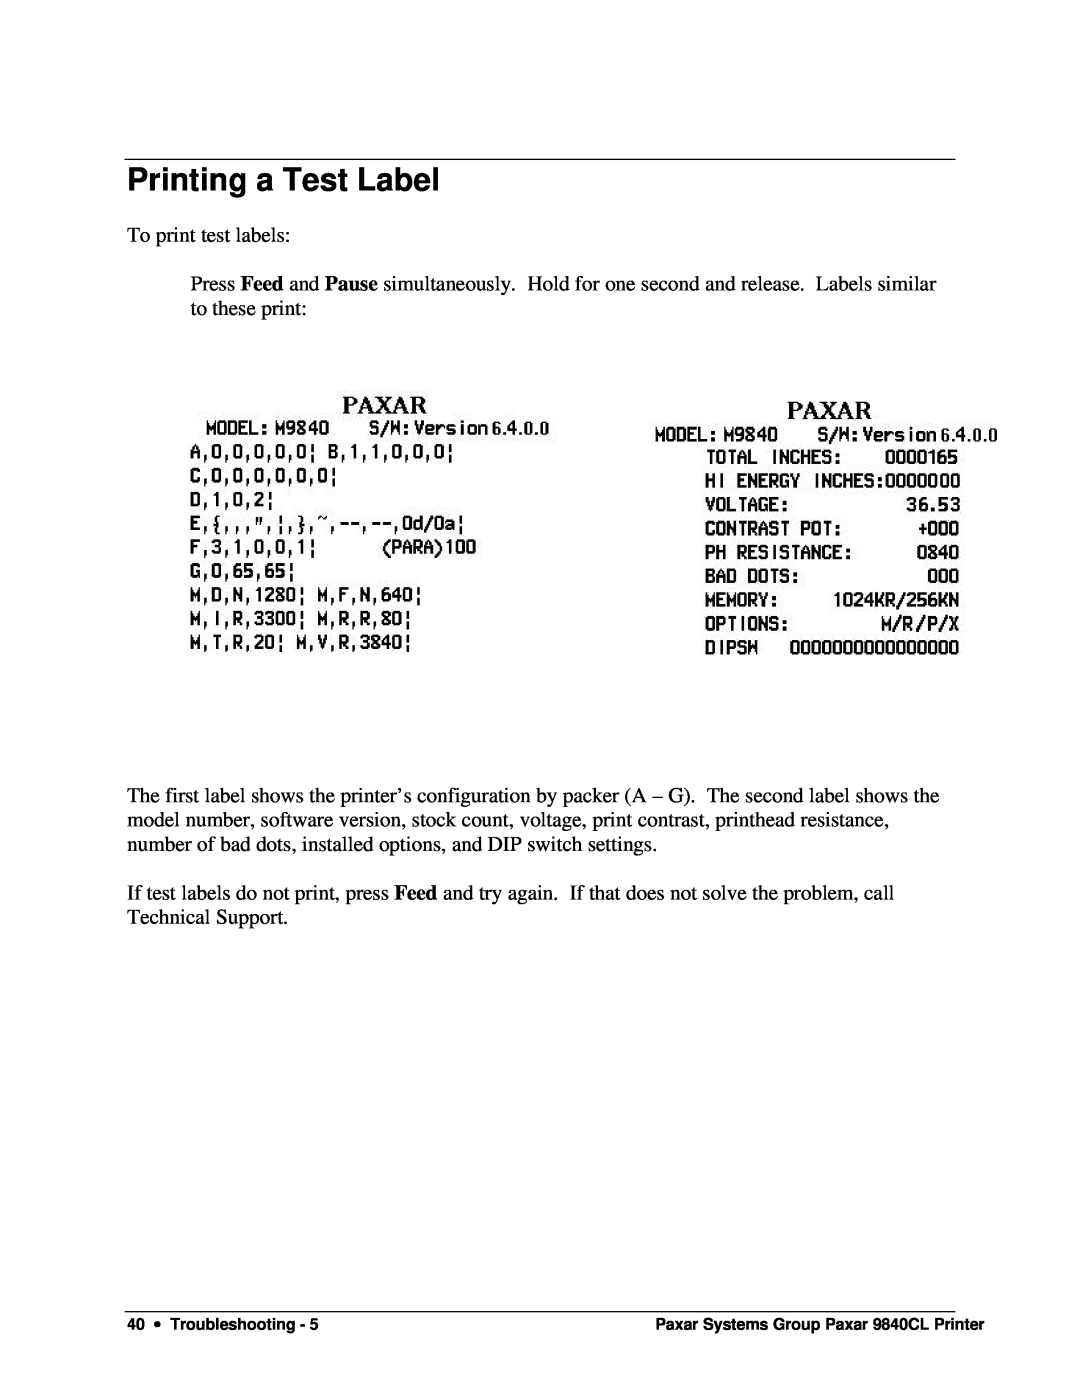 Paxar 9840CL user manual Printing a Test Label 